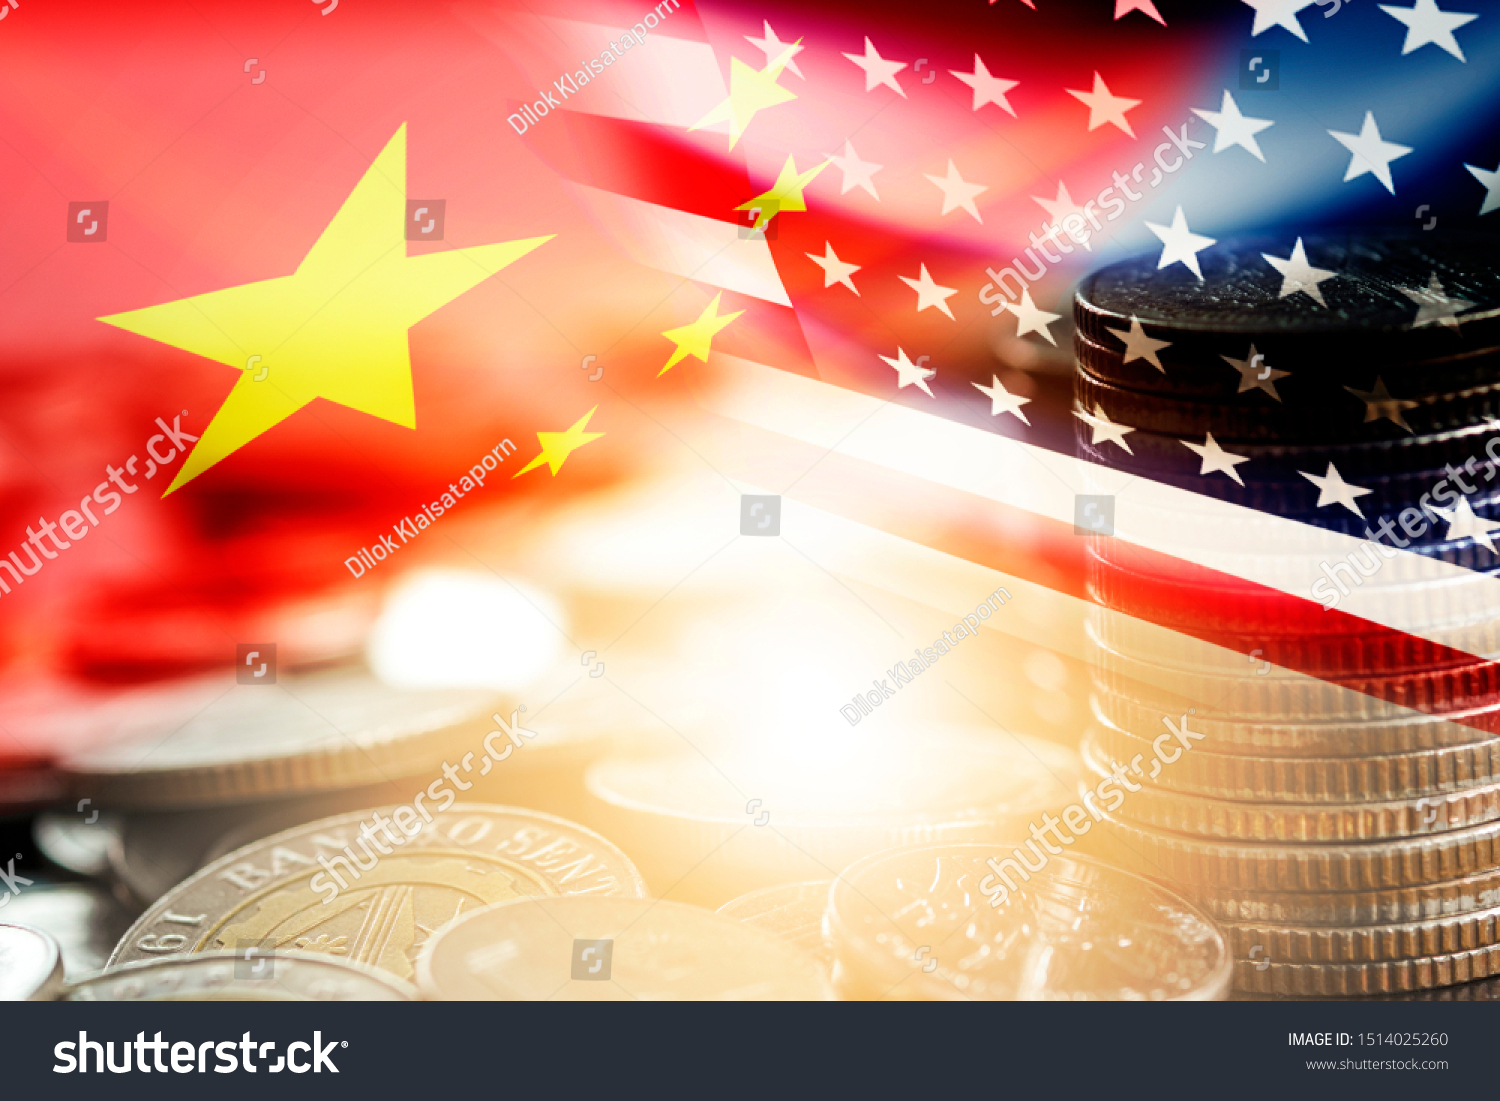 USA and China flag on coins stacking .It is symbol of economic tariffs trade war and tax barrier between United States of America and China. #1514025260